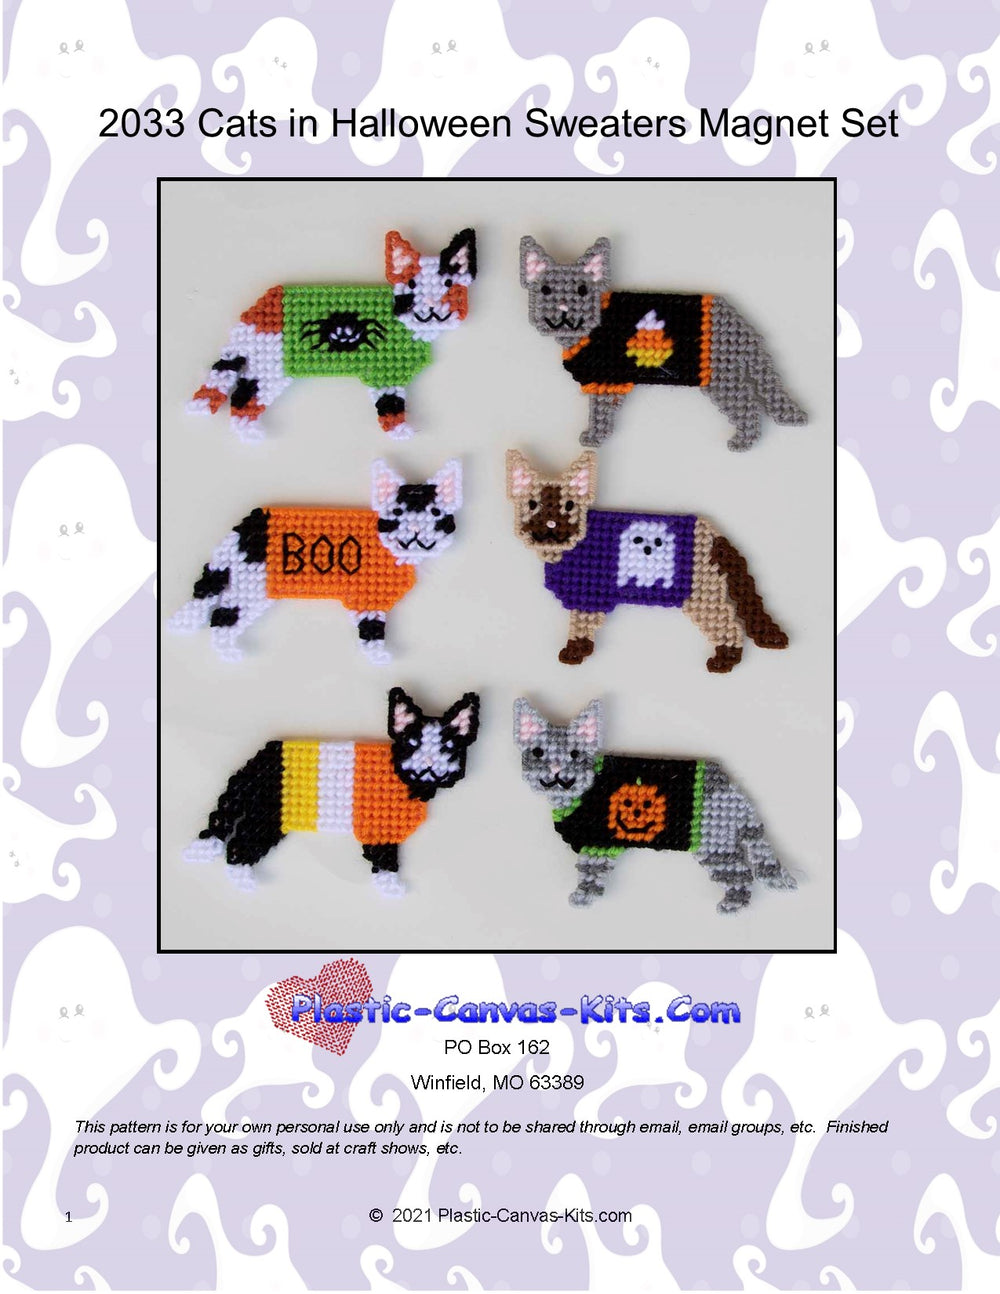 Cats in Halloween Sweaters Magnet Set